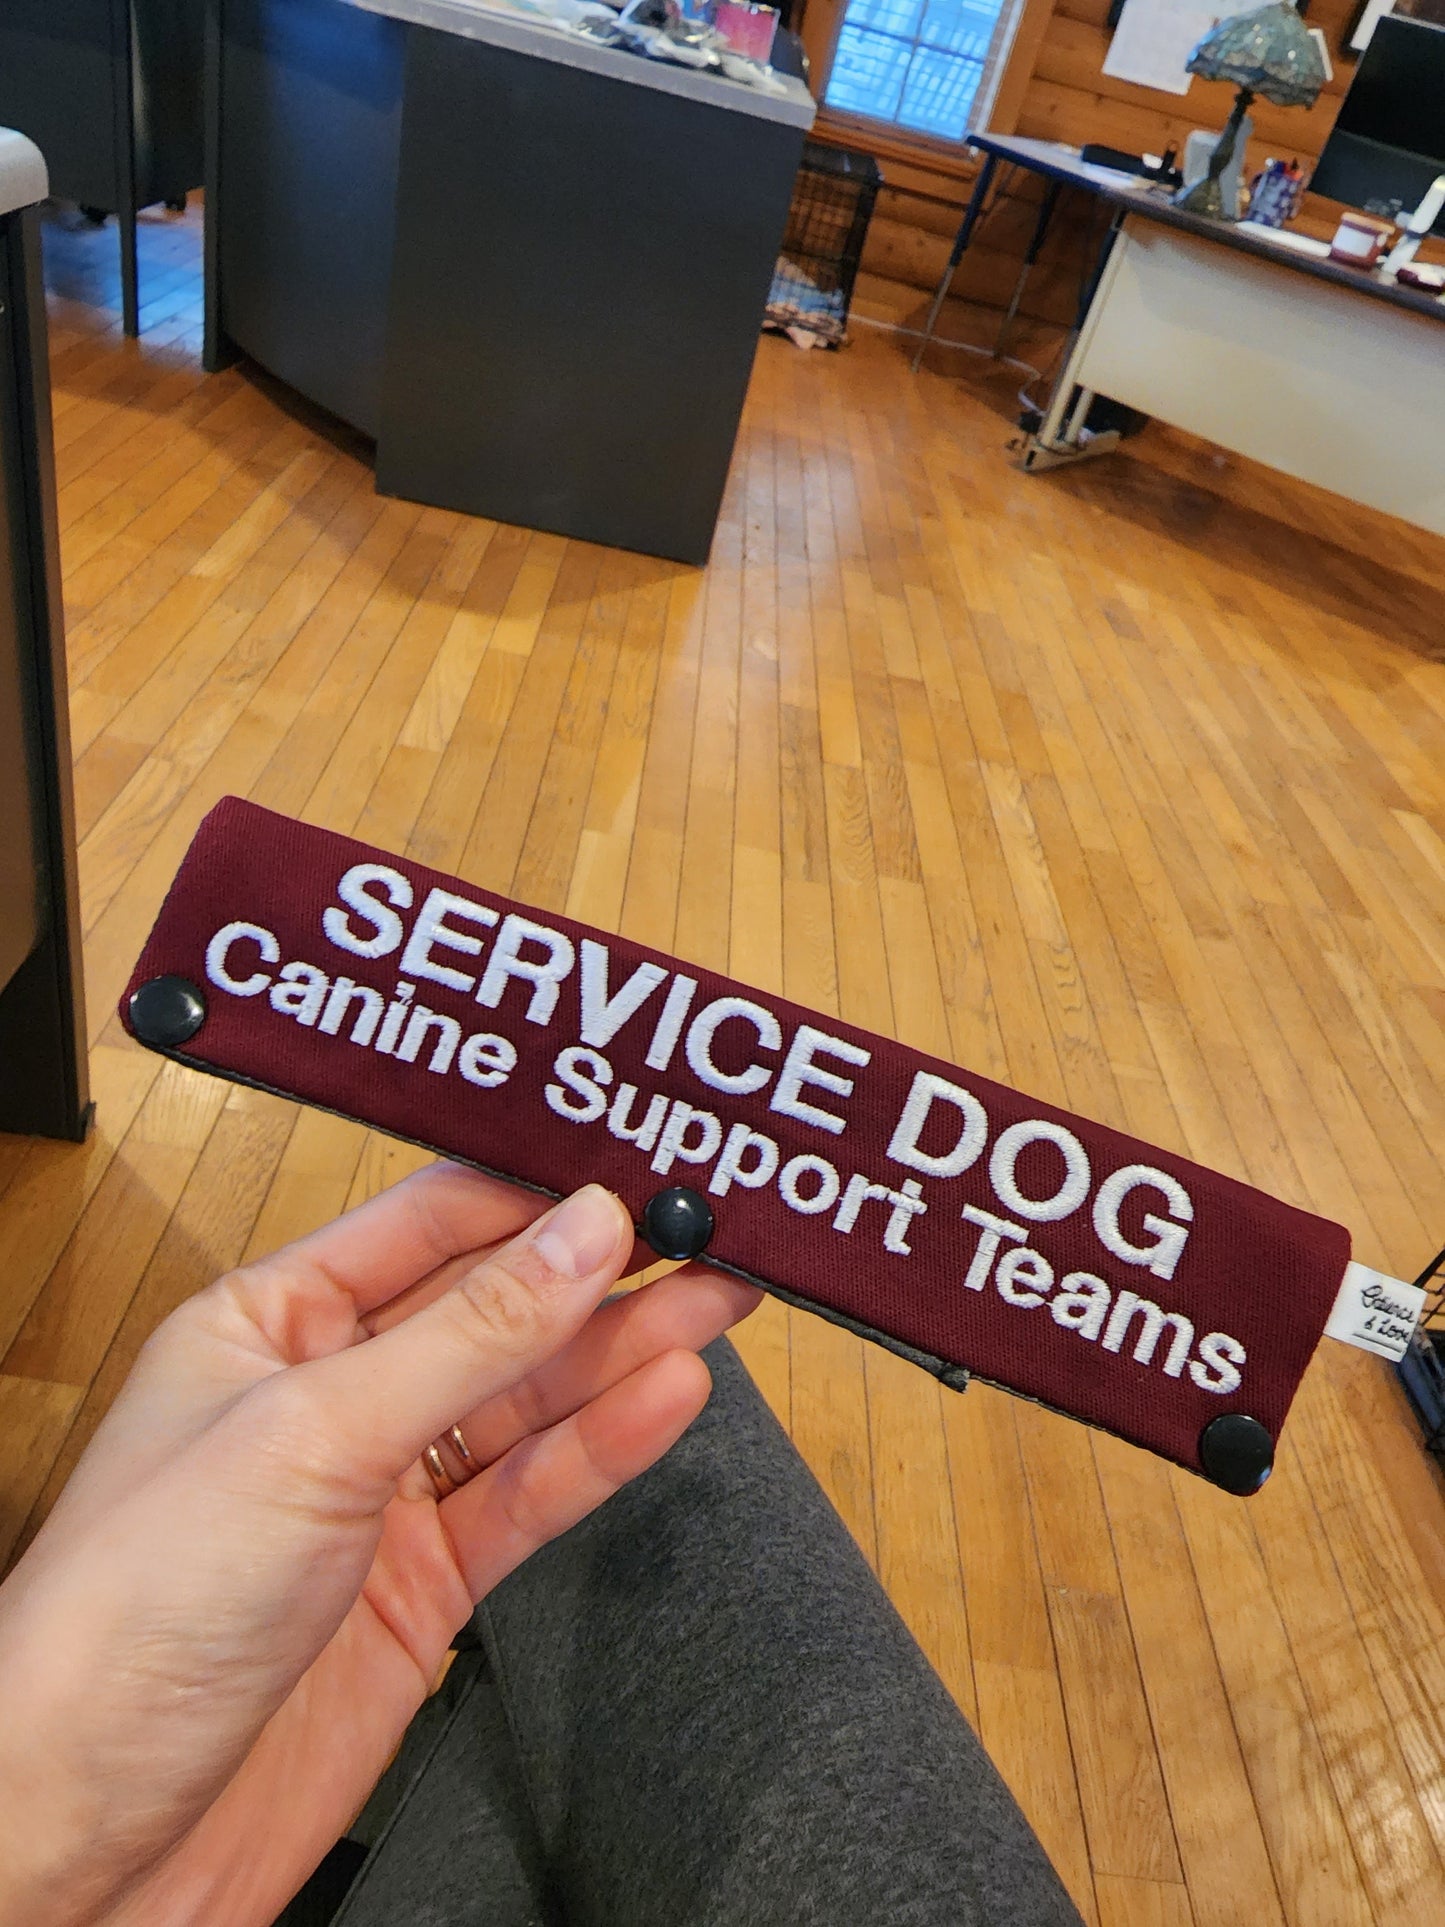 10 sleeves for Canine Support Teams